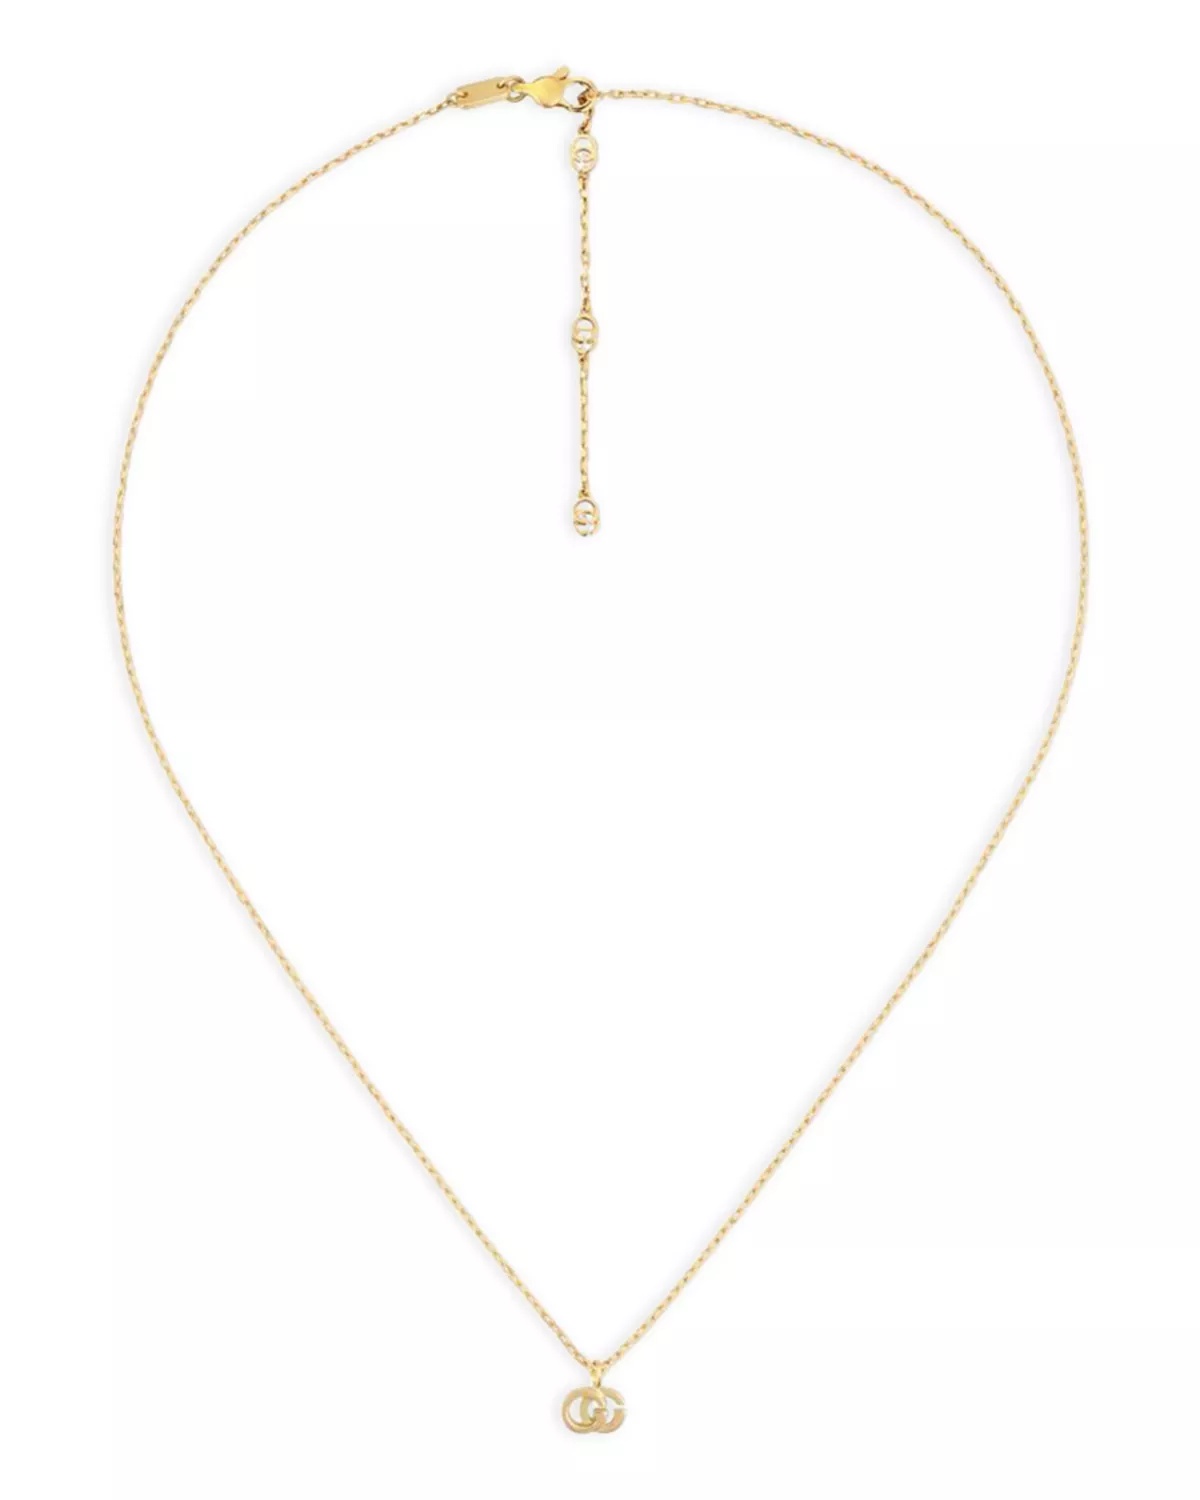 18K Yellow Gold Running G Necklace, 16.5" - 1